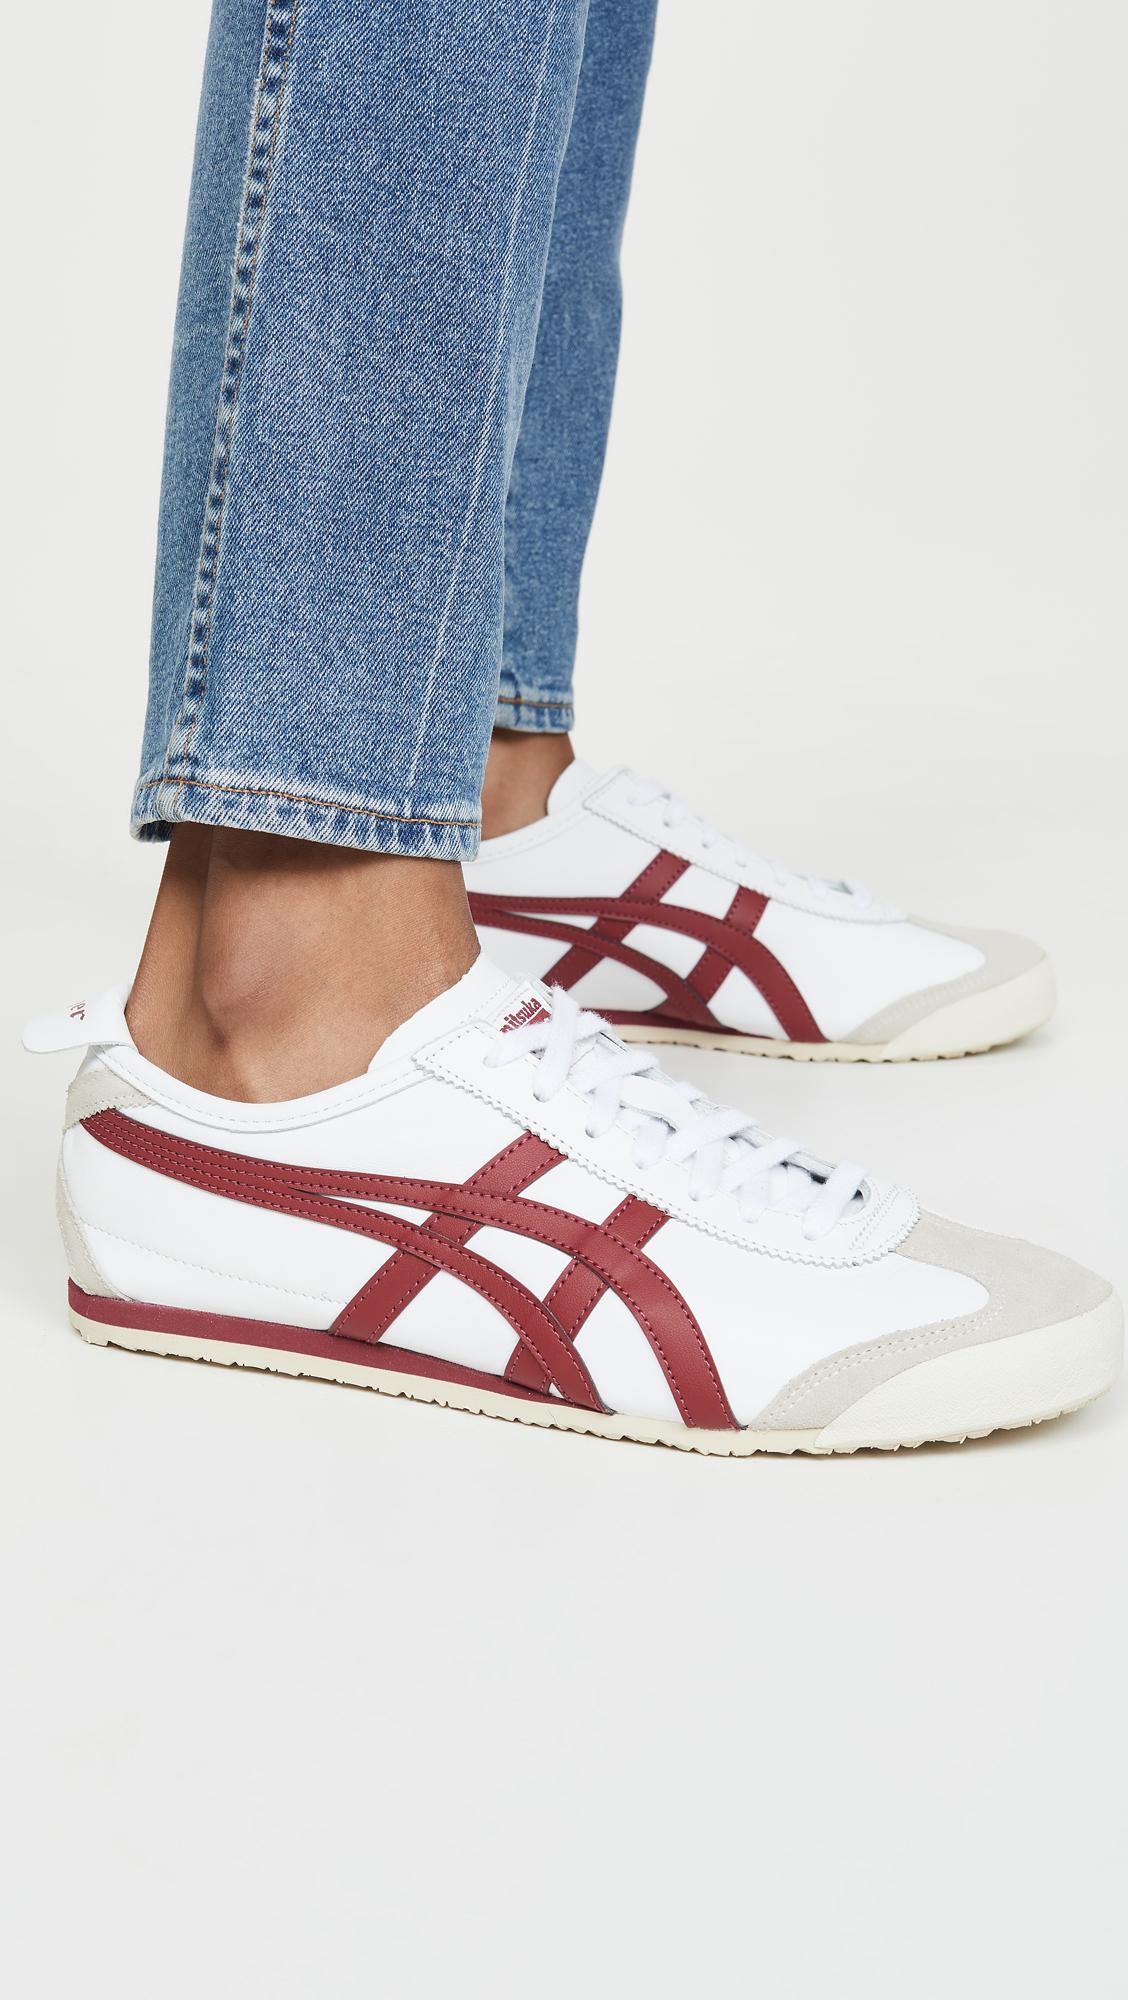 Onitsuka Tiger Leather Mexico 66 Sneakers in White/Burgundy (White) | Lyst